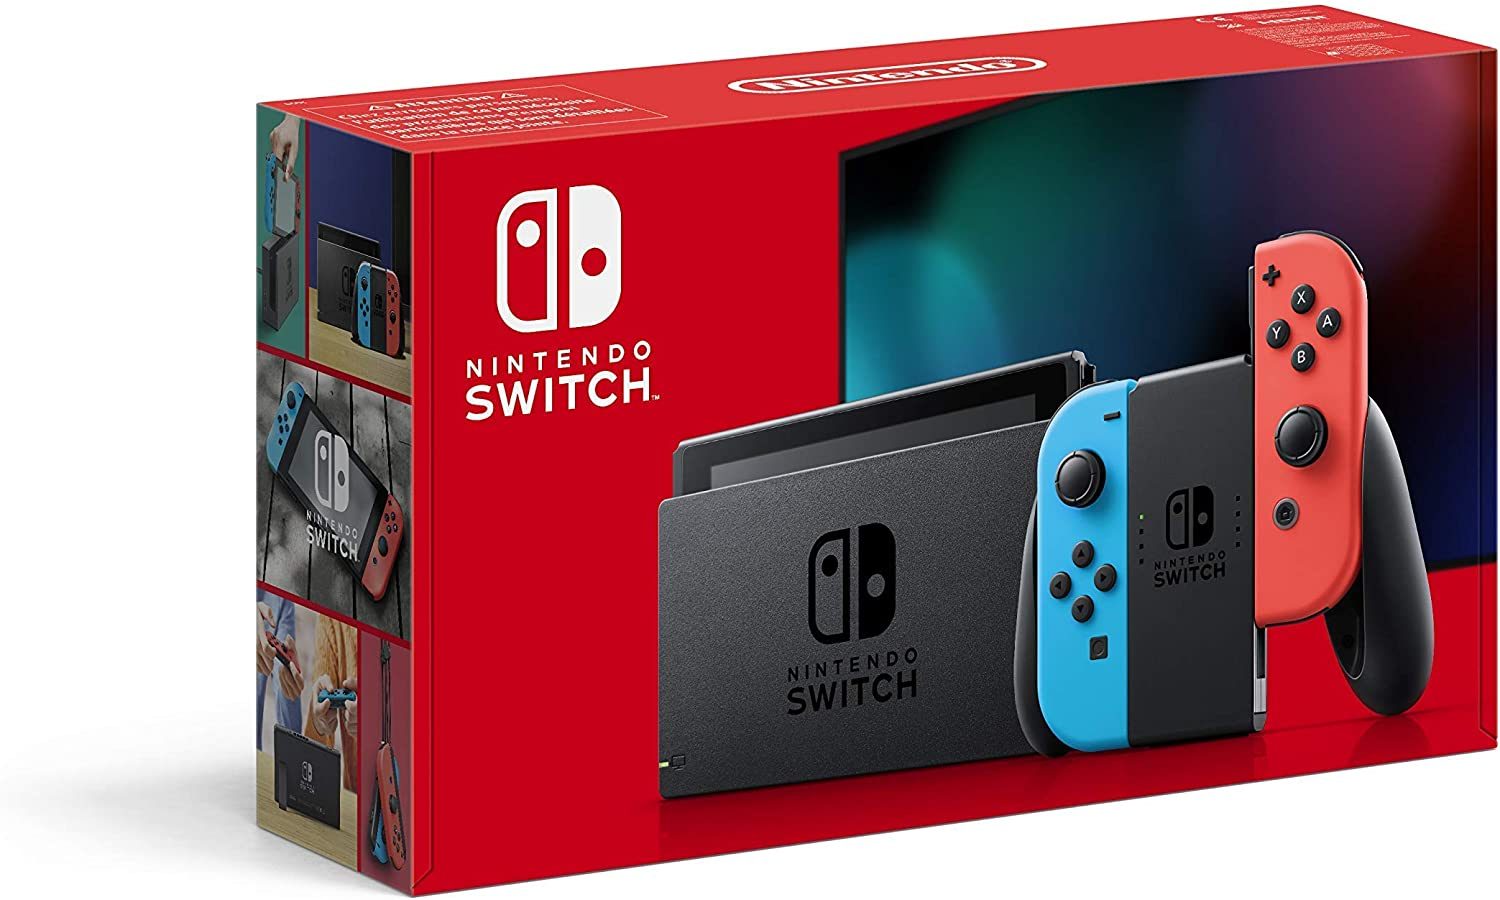 Image 1 : Nintendo Switch Oled, Switch ou Switch Lite : quelle console choisir ?